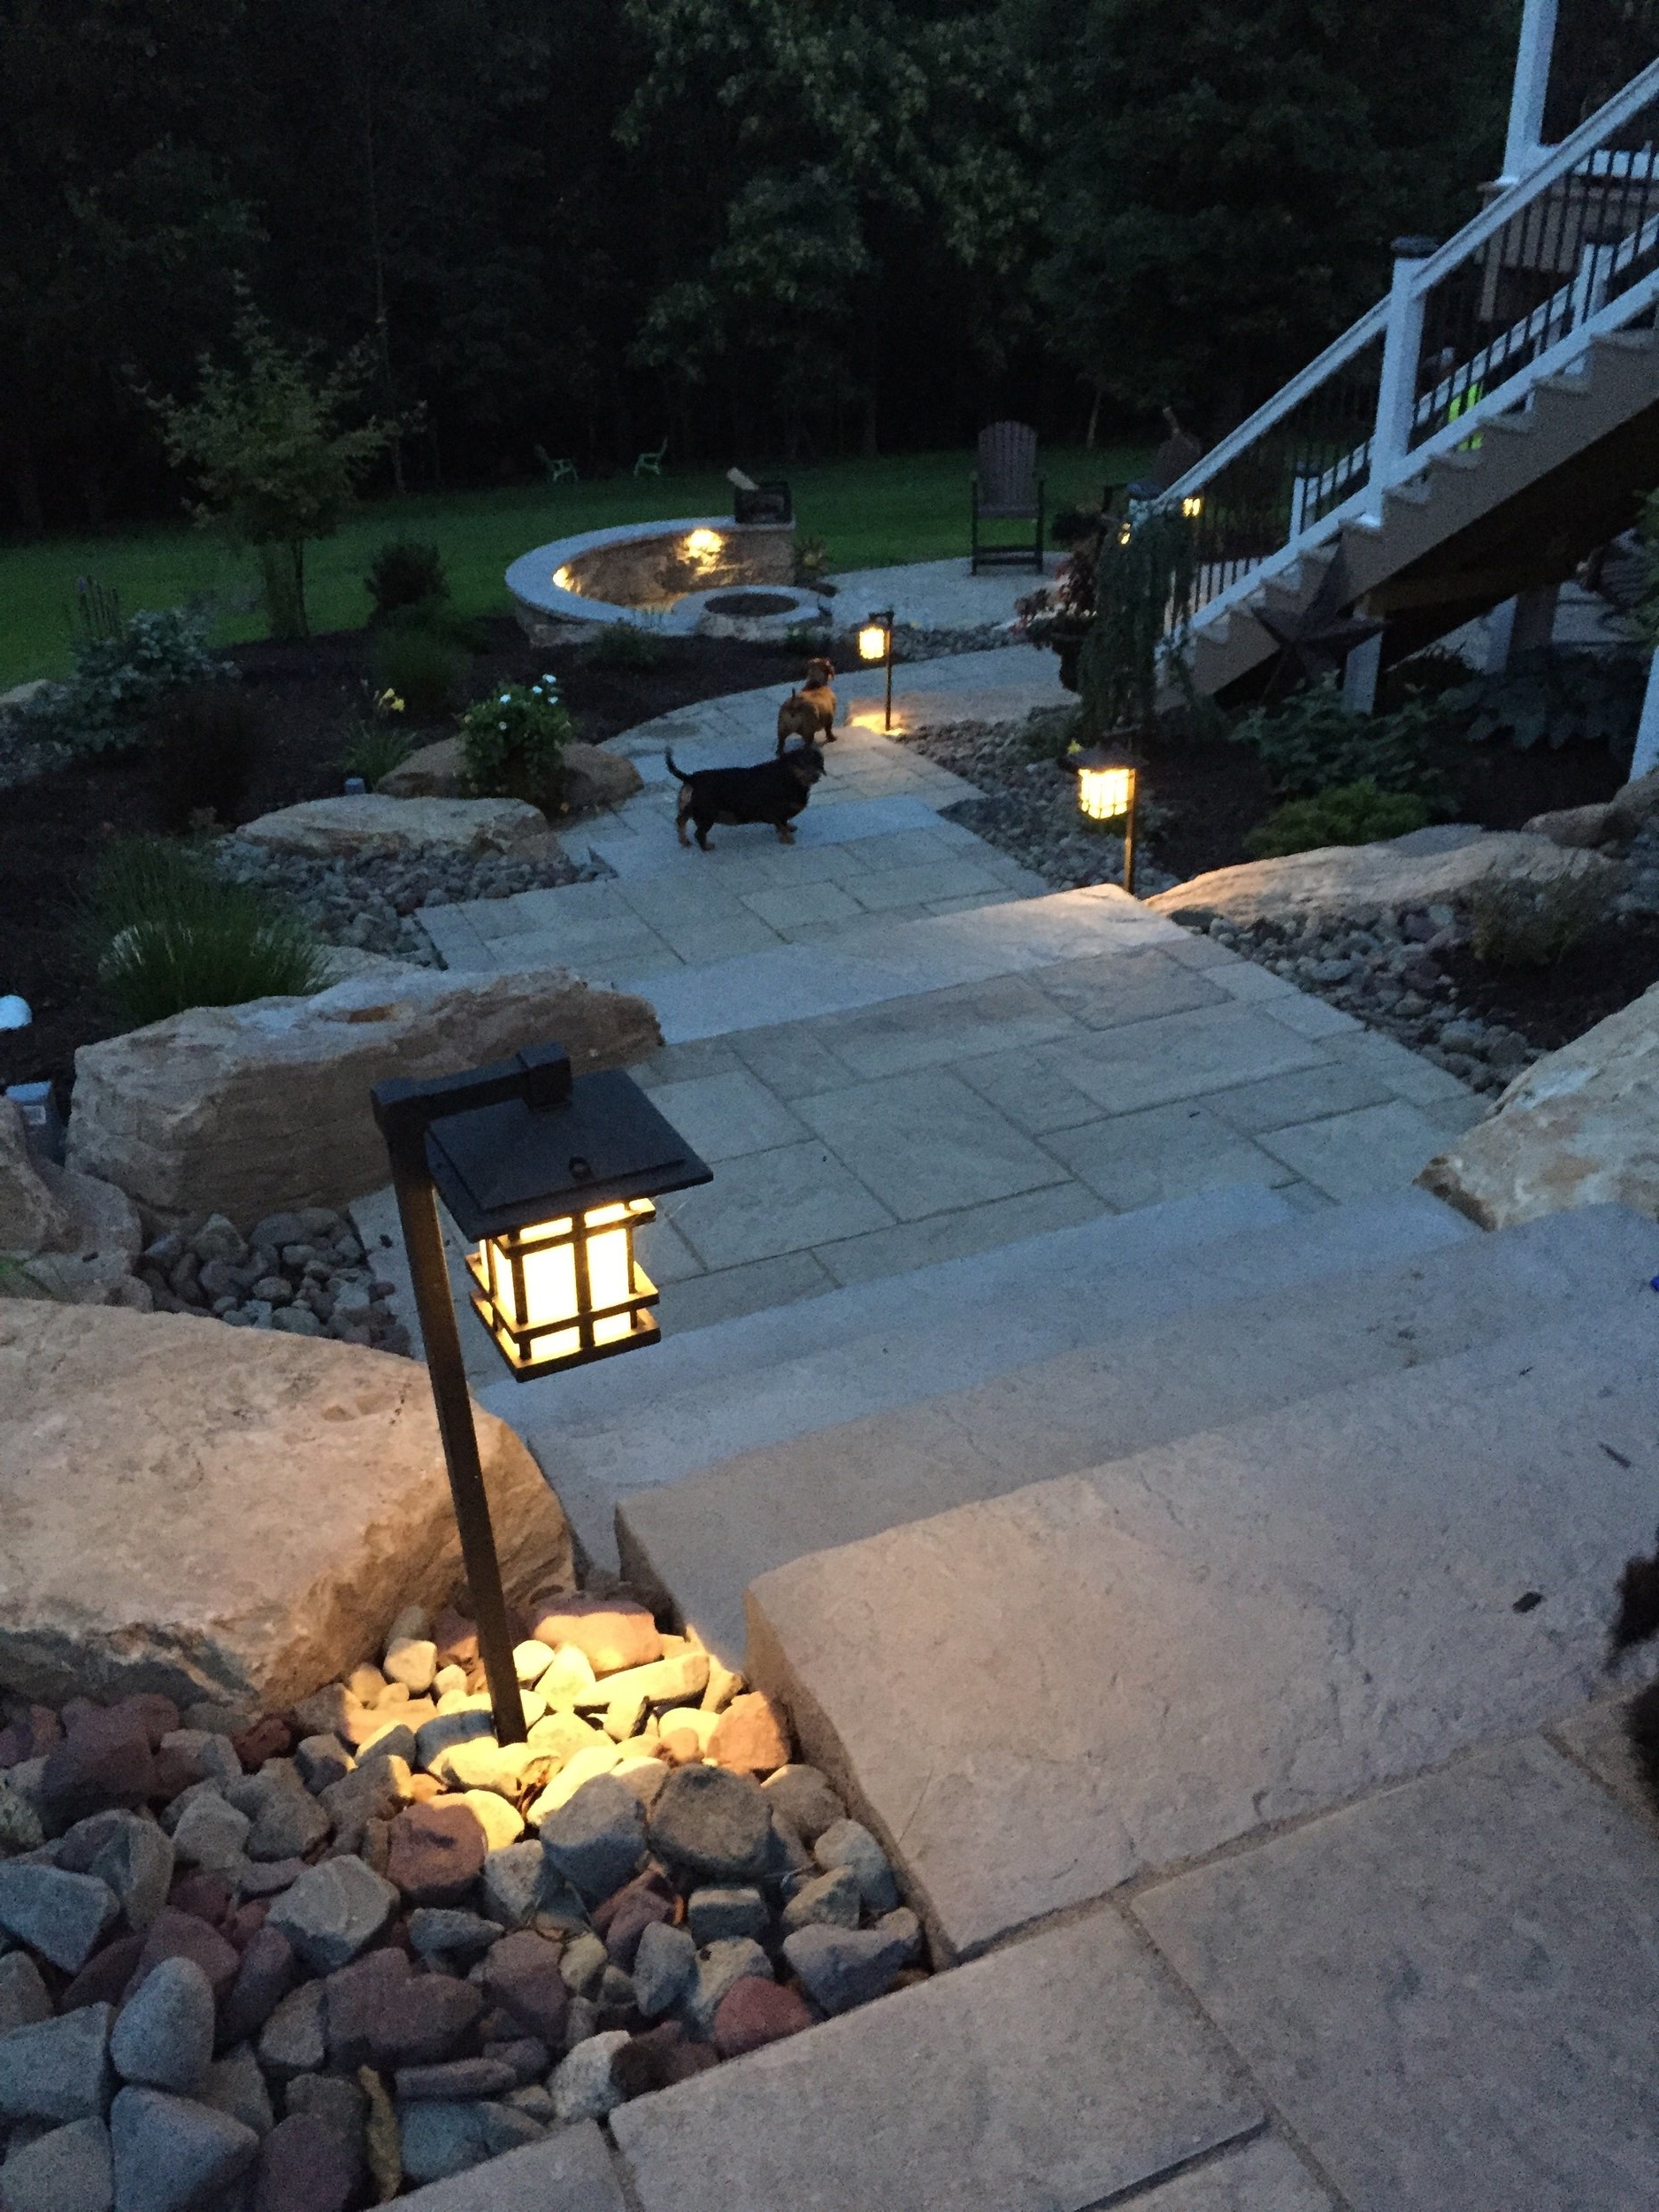 Professional landscape design with outdoor lighting in Reiffton, PA - Outdoor kitchen Reiffton, PA